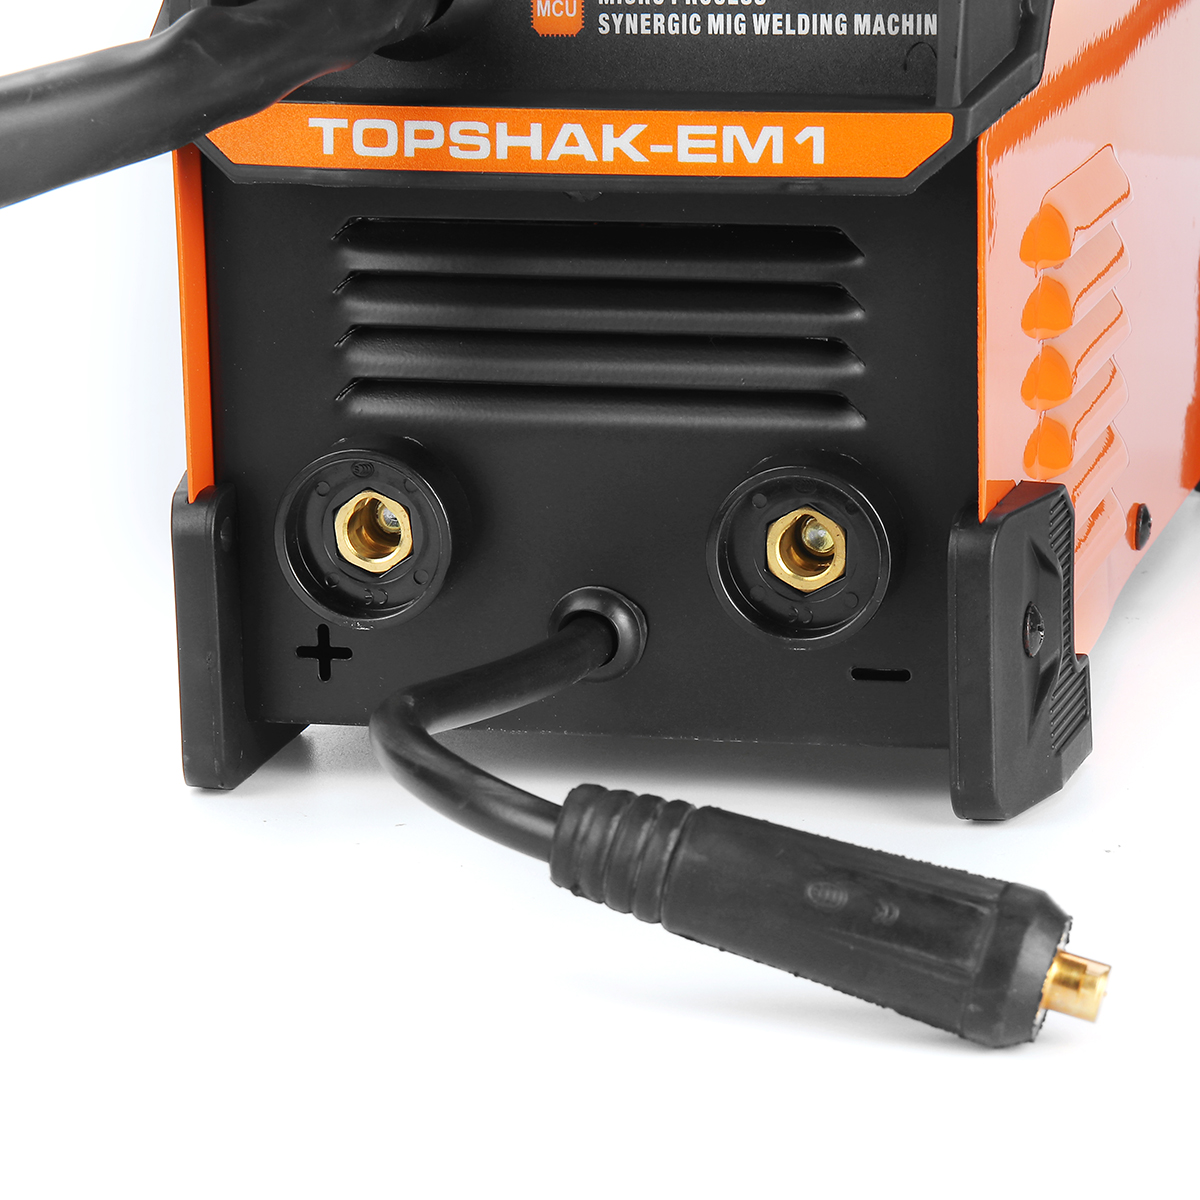 Find Topshak TS-EM1 220V 3-in-1 160A Multifunctional Welding Machine with MlG/MAG/FCW/MMA/TIG Welding Tools for Sale on Gipsybee.com with cryptocurrencies